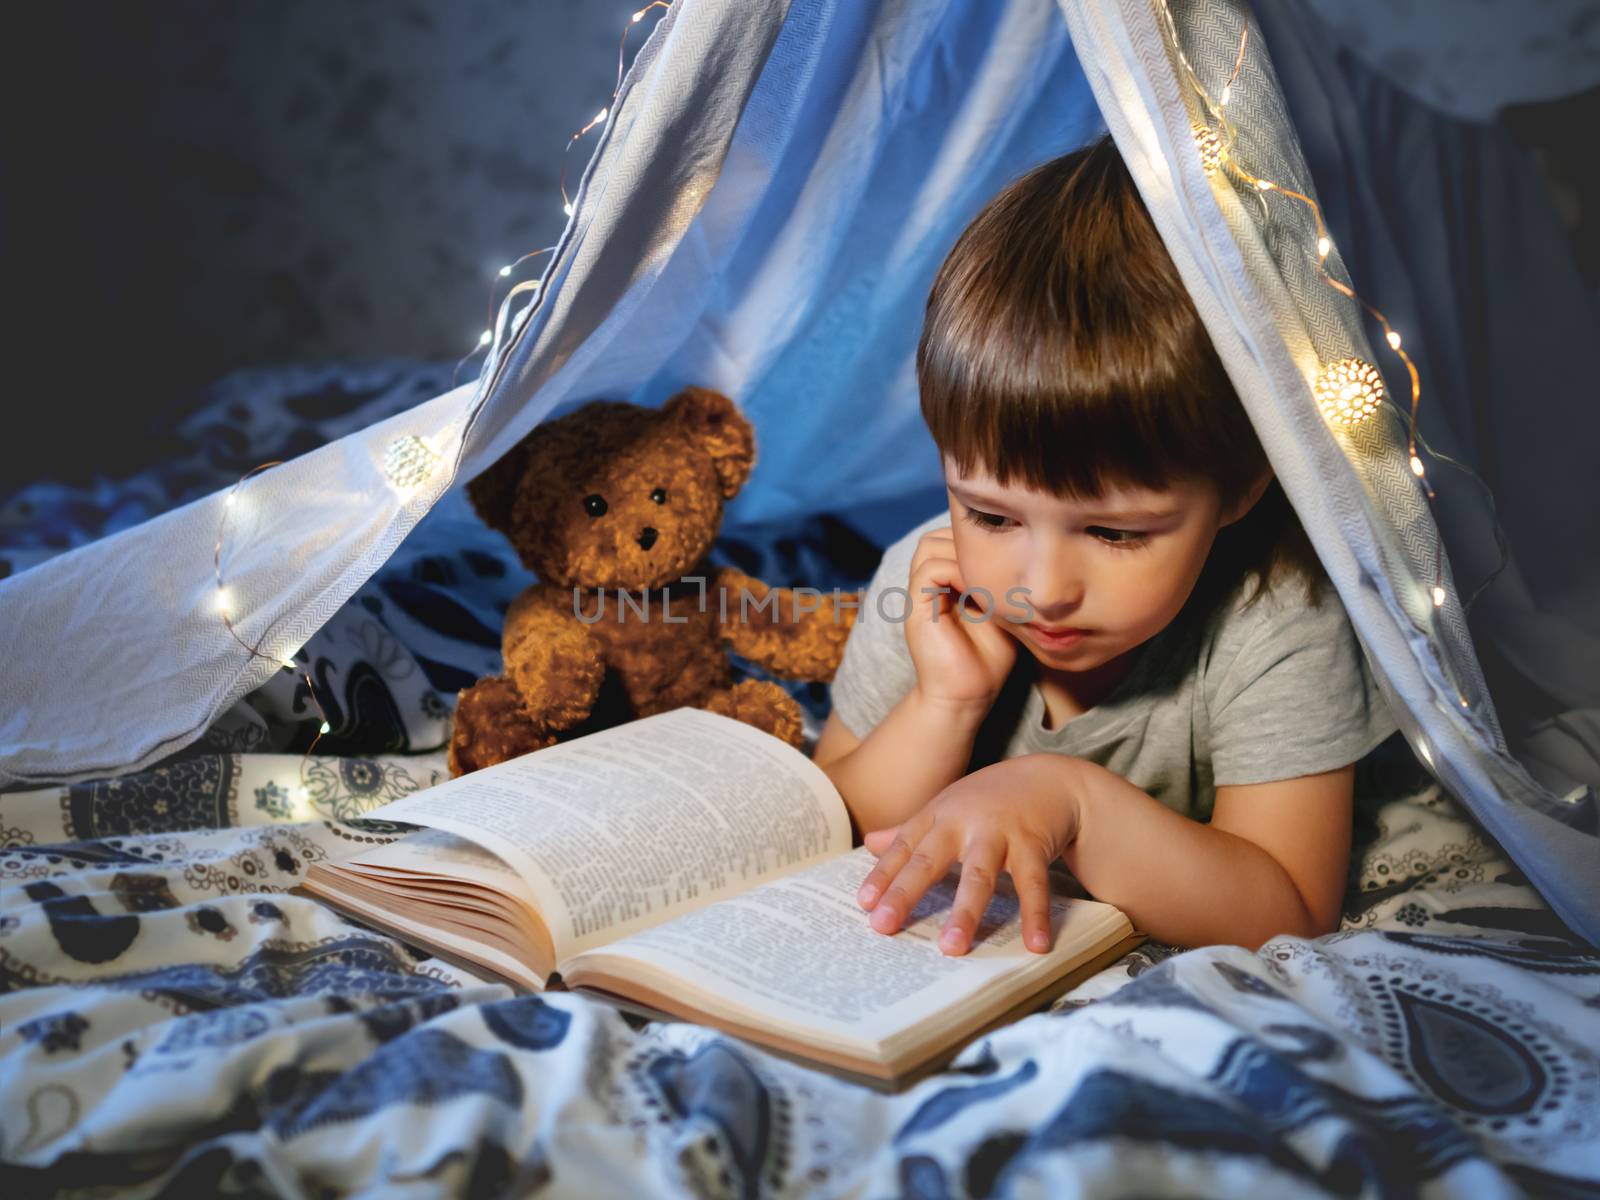 Little boy reads book. Toddler plays in tent made of linen sheet with light bulbs on bed. Cozy evening with favorite book.